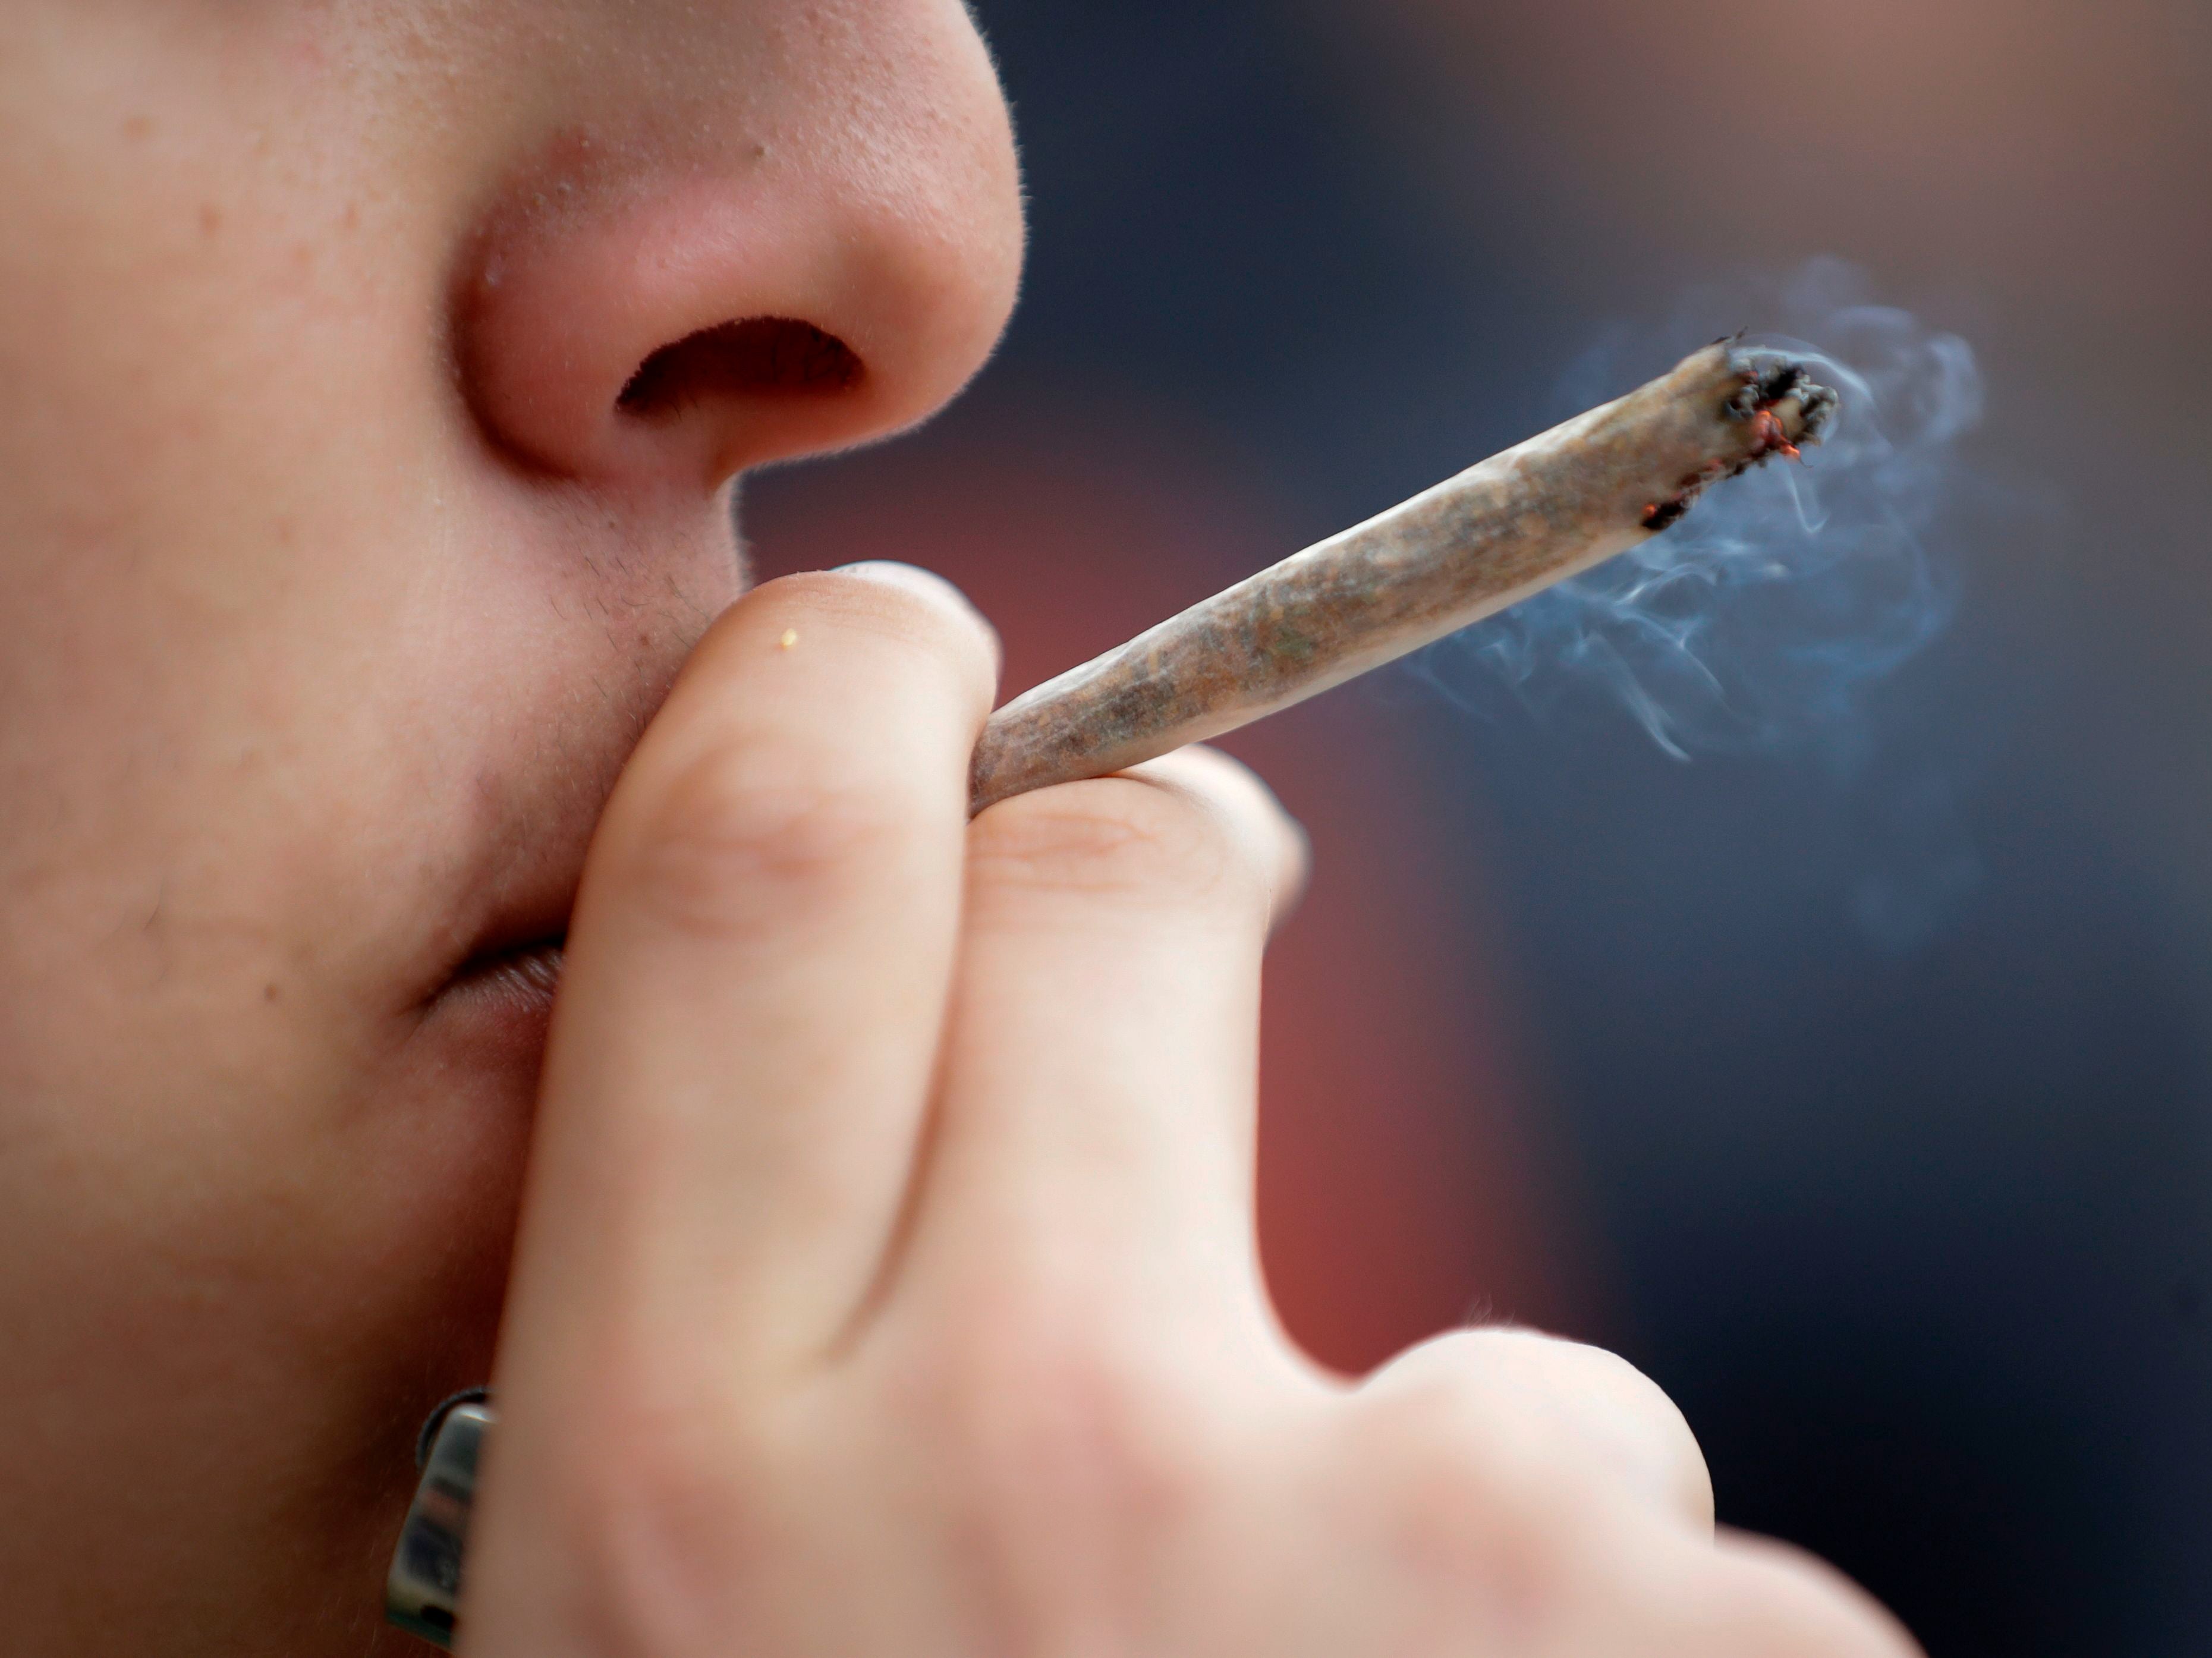 Germany’s health minister drafts plans to legalise cannabis